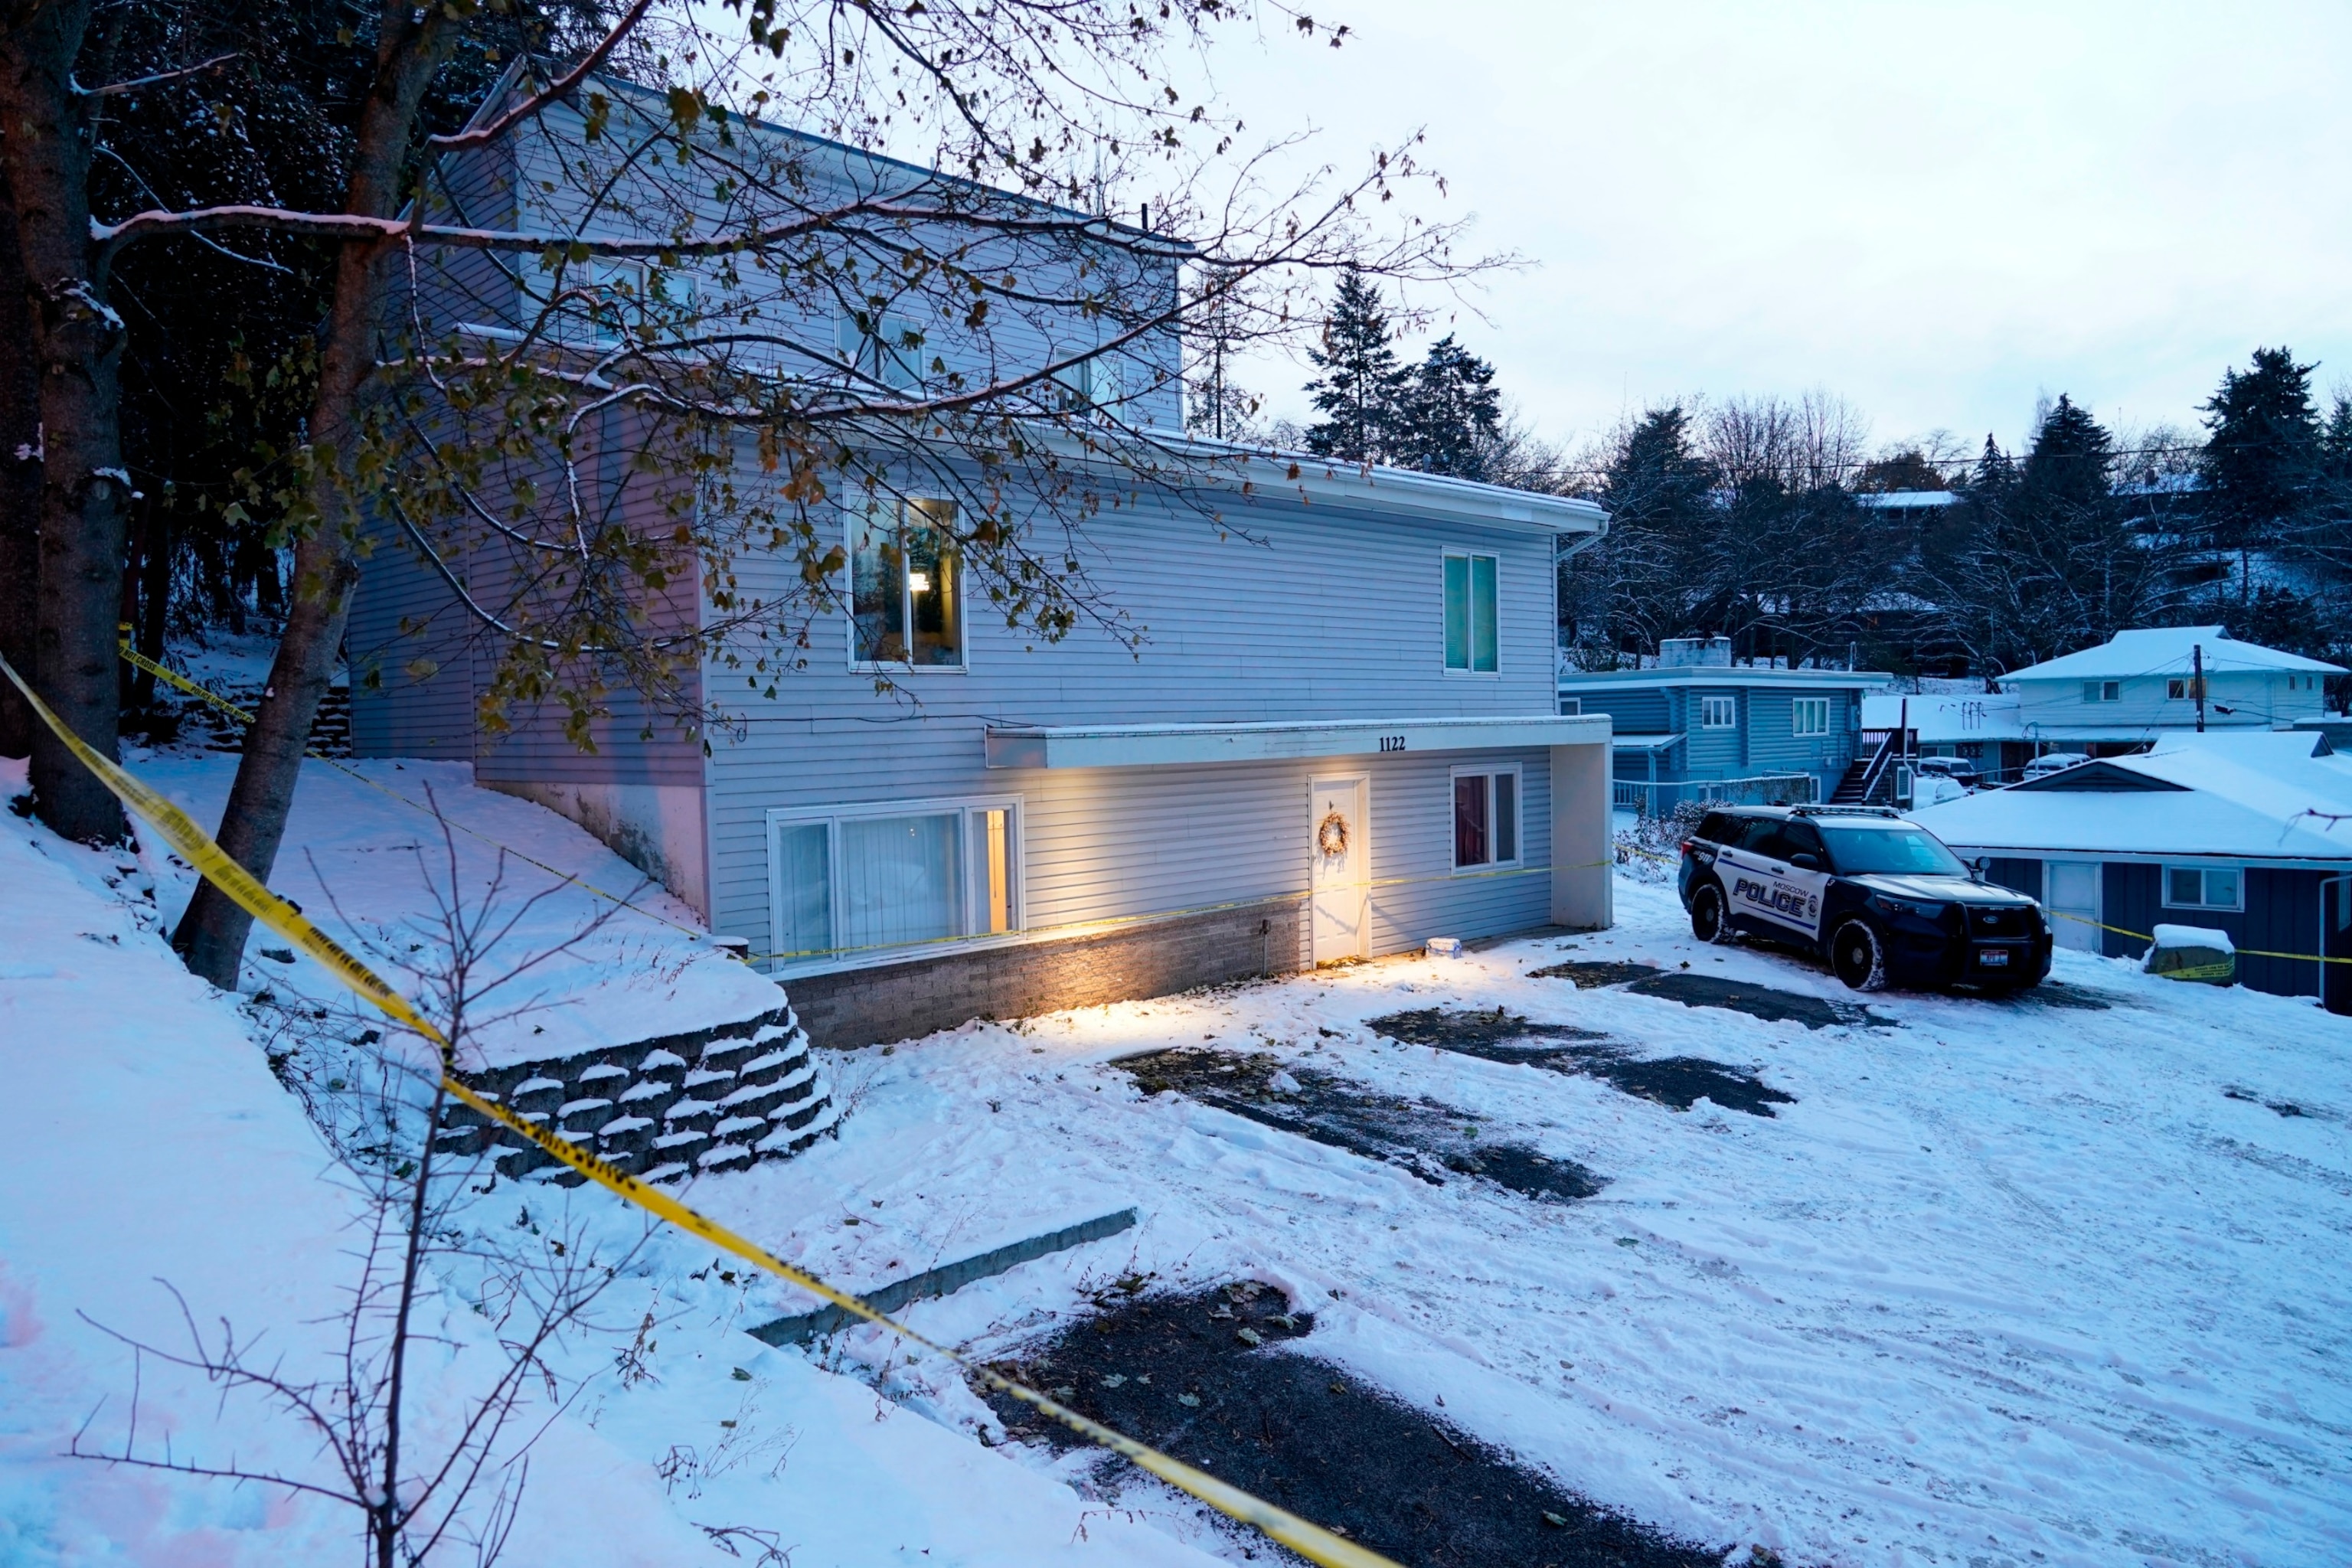 PHOTO: Bare spots are seen on Nov. 29, 2022, in the snowy parking lot in front of the home where four University of Idaho students were found dead on Nov. 13, in Moscow, Idaho.